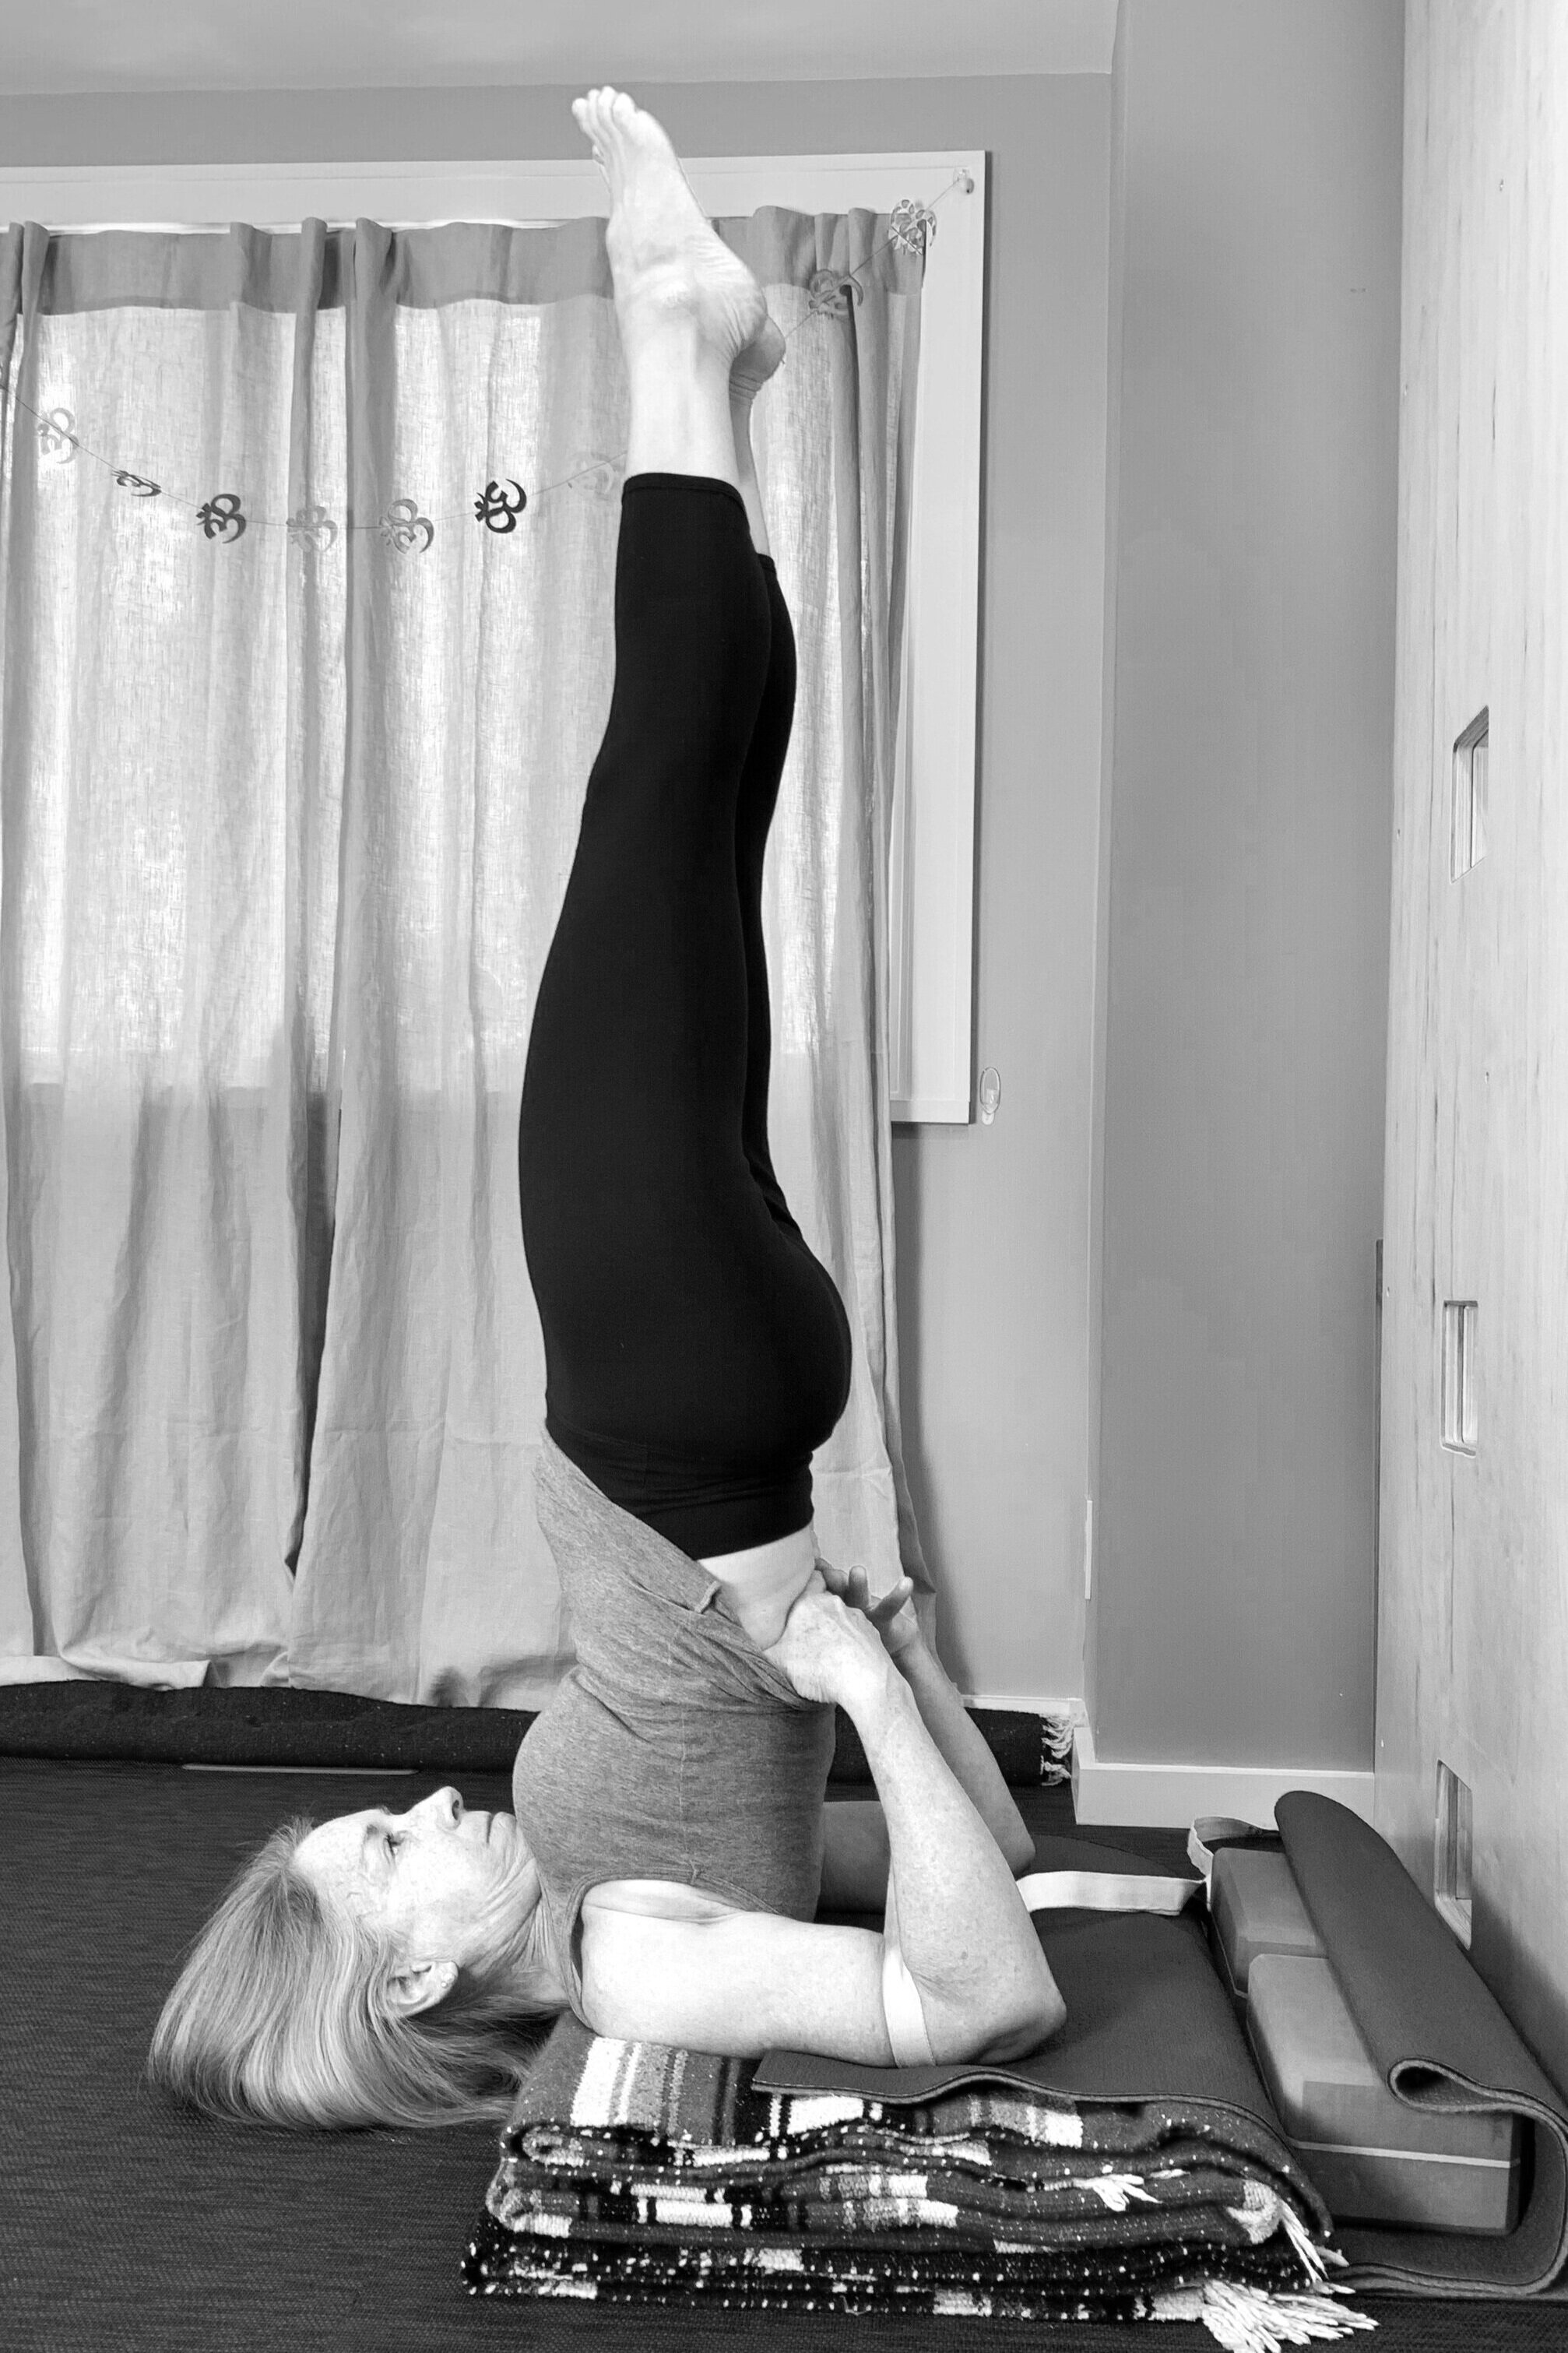 Shoulderstand - The Mother - The Yoga Place